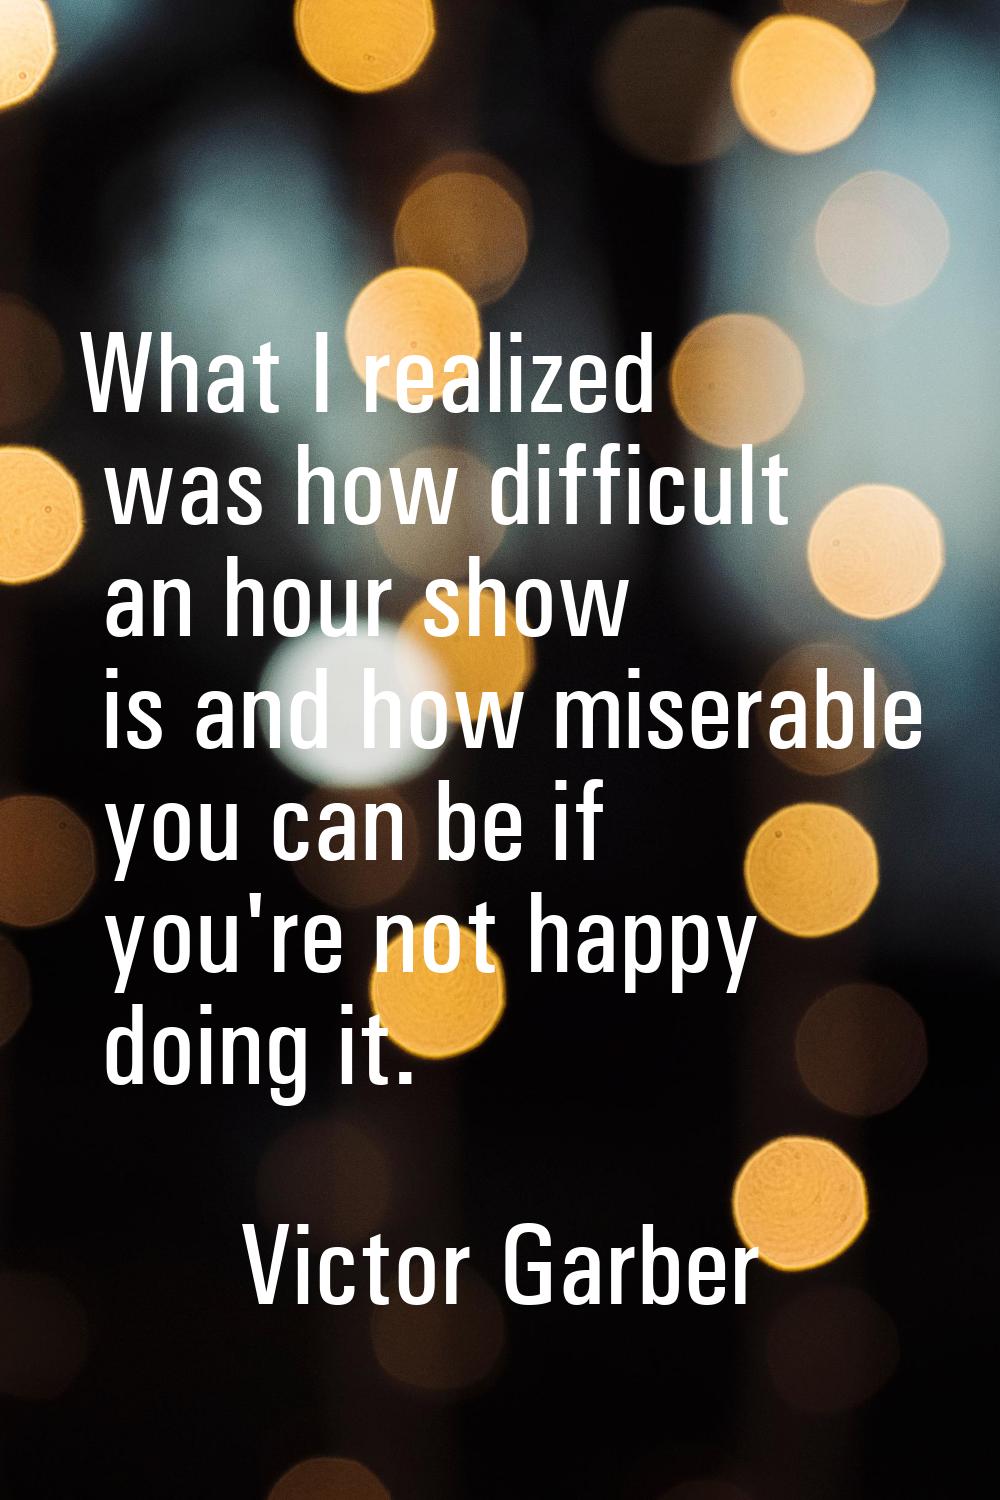 What I realized was how difficult an hour show is and how miserable you can be if you're not happy 